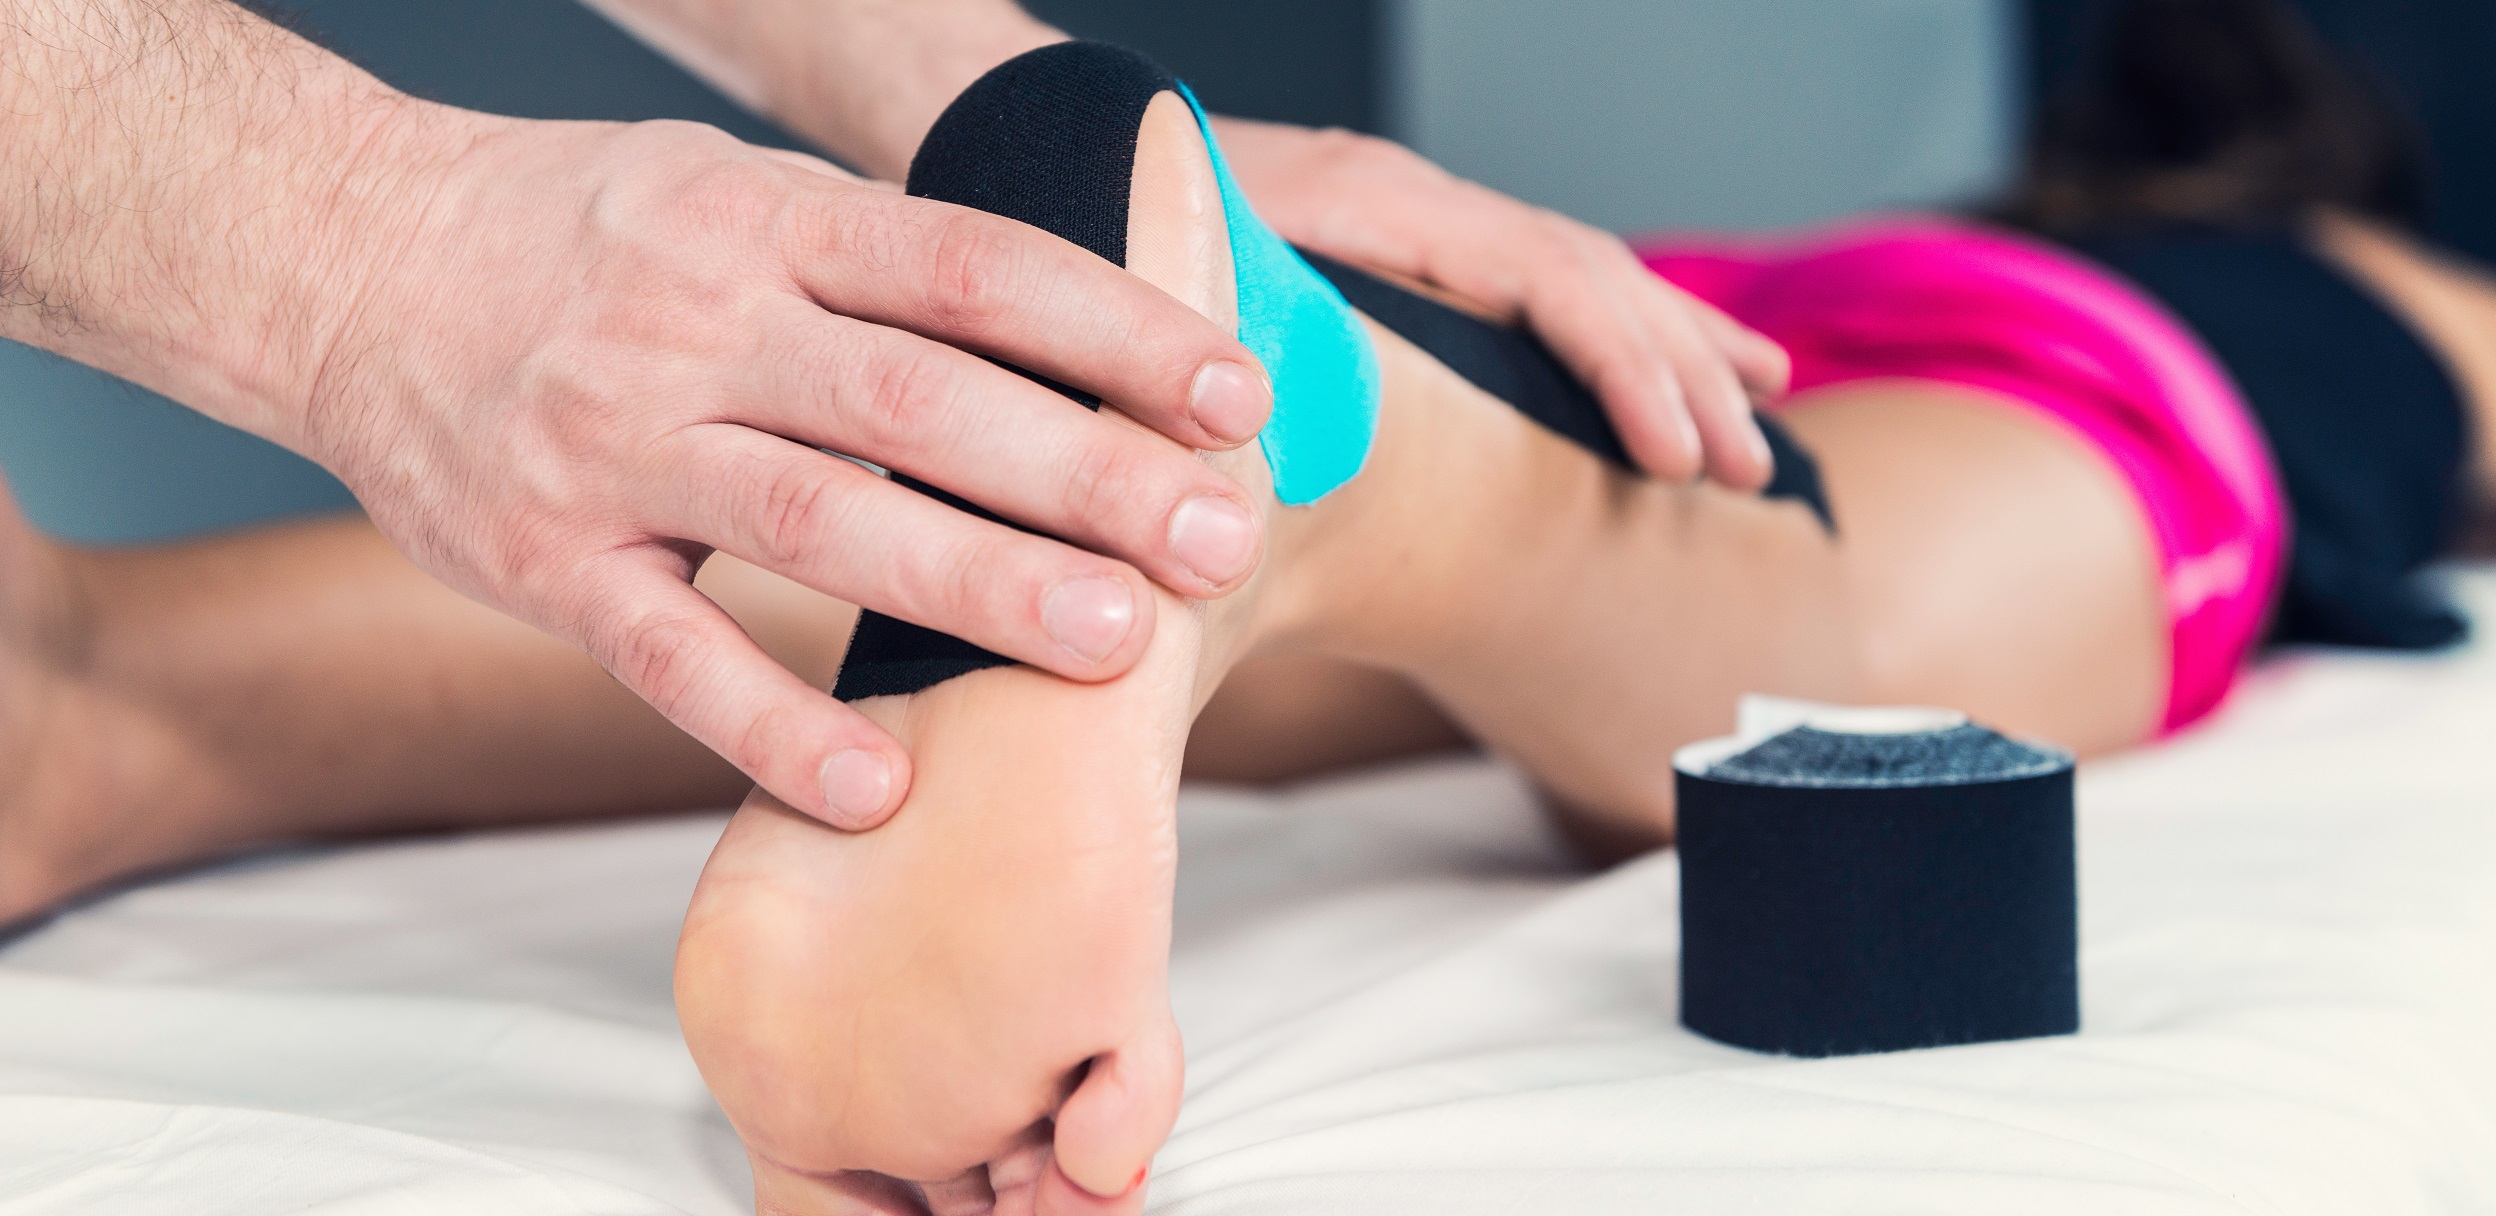 How to recover from an exercise injury – according to a sports  physiotherapist